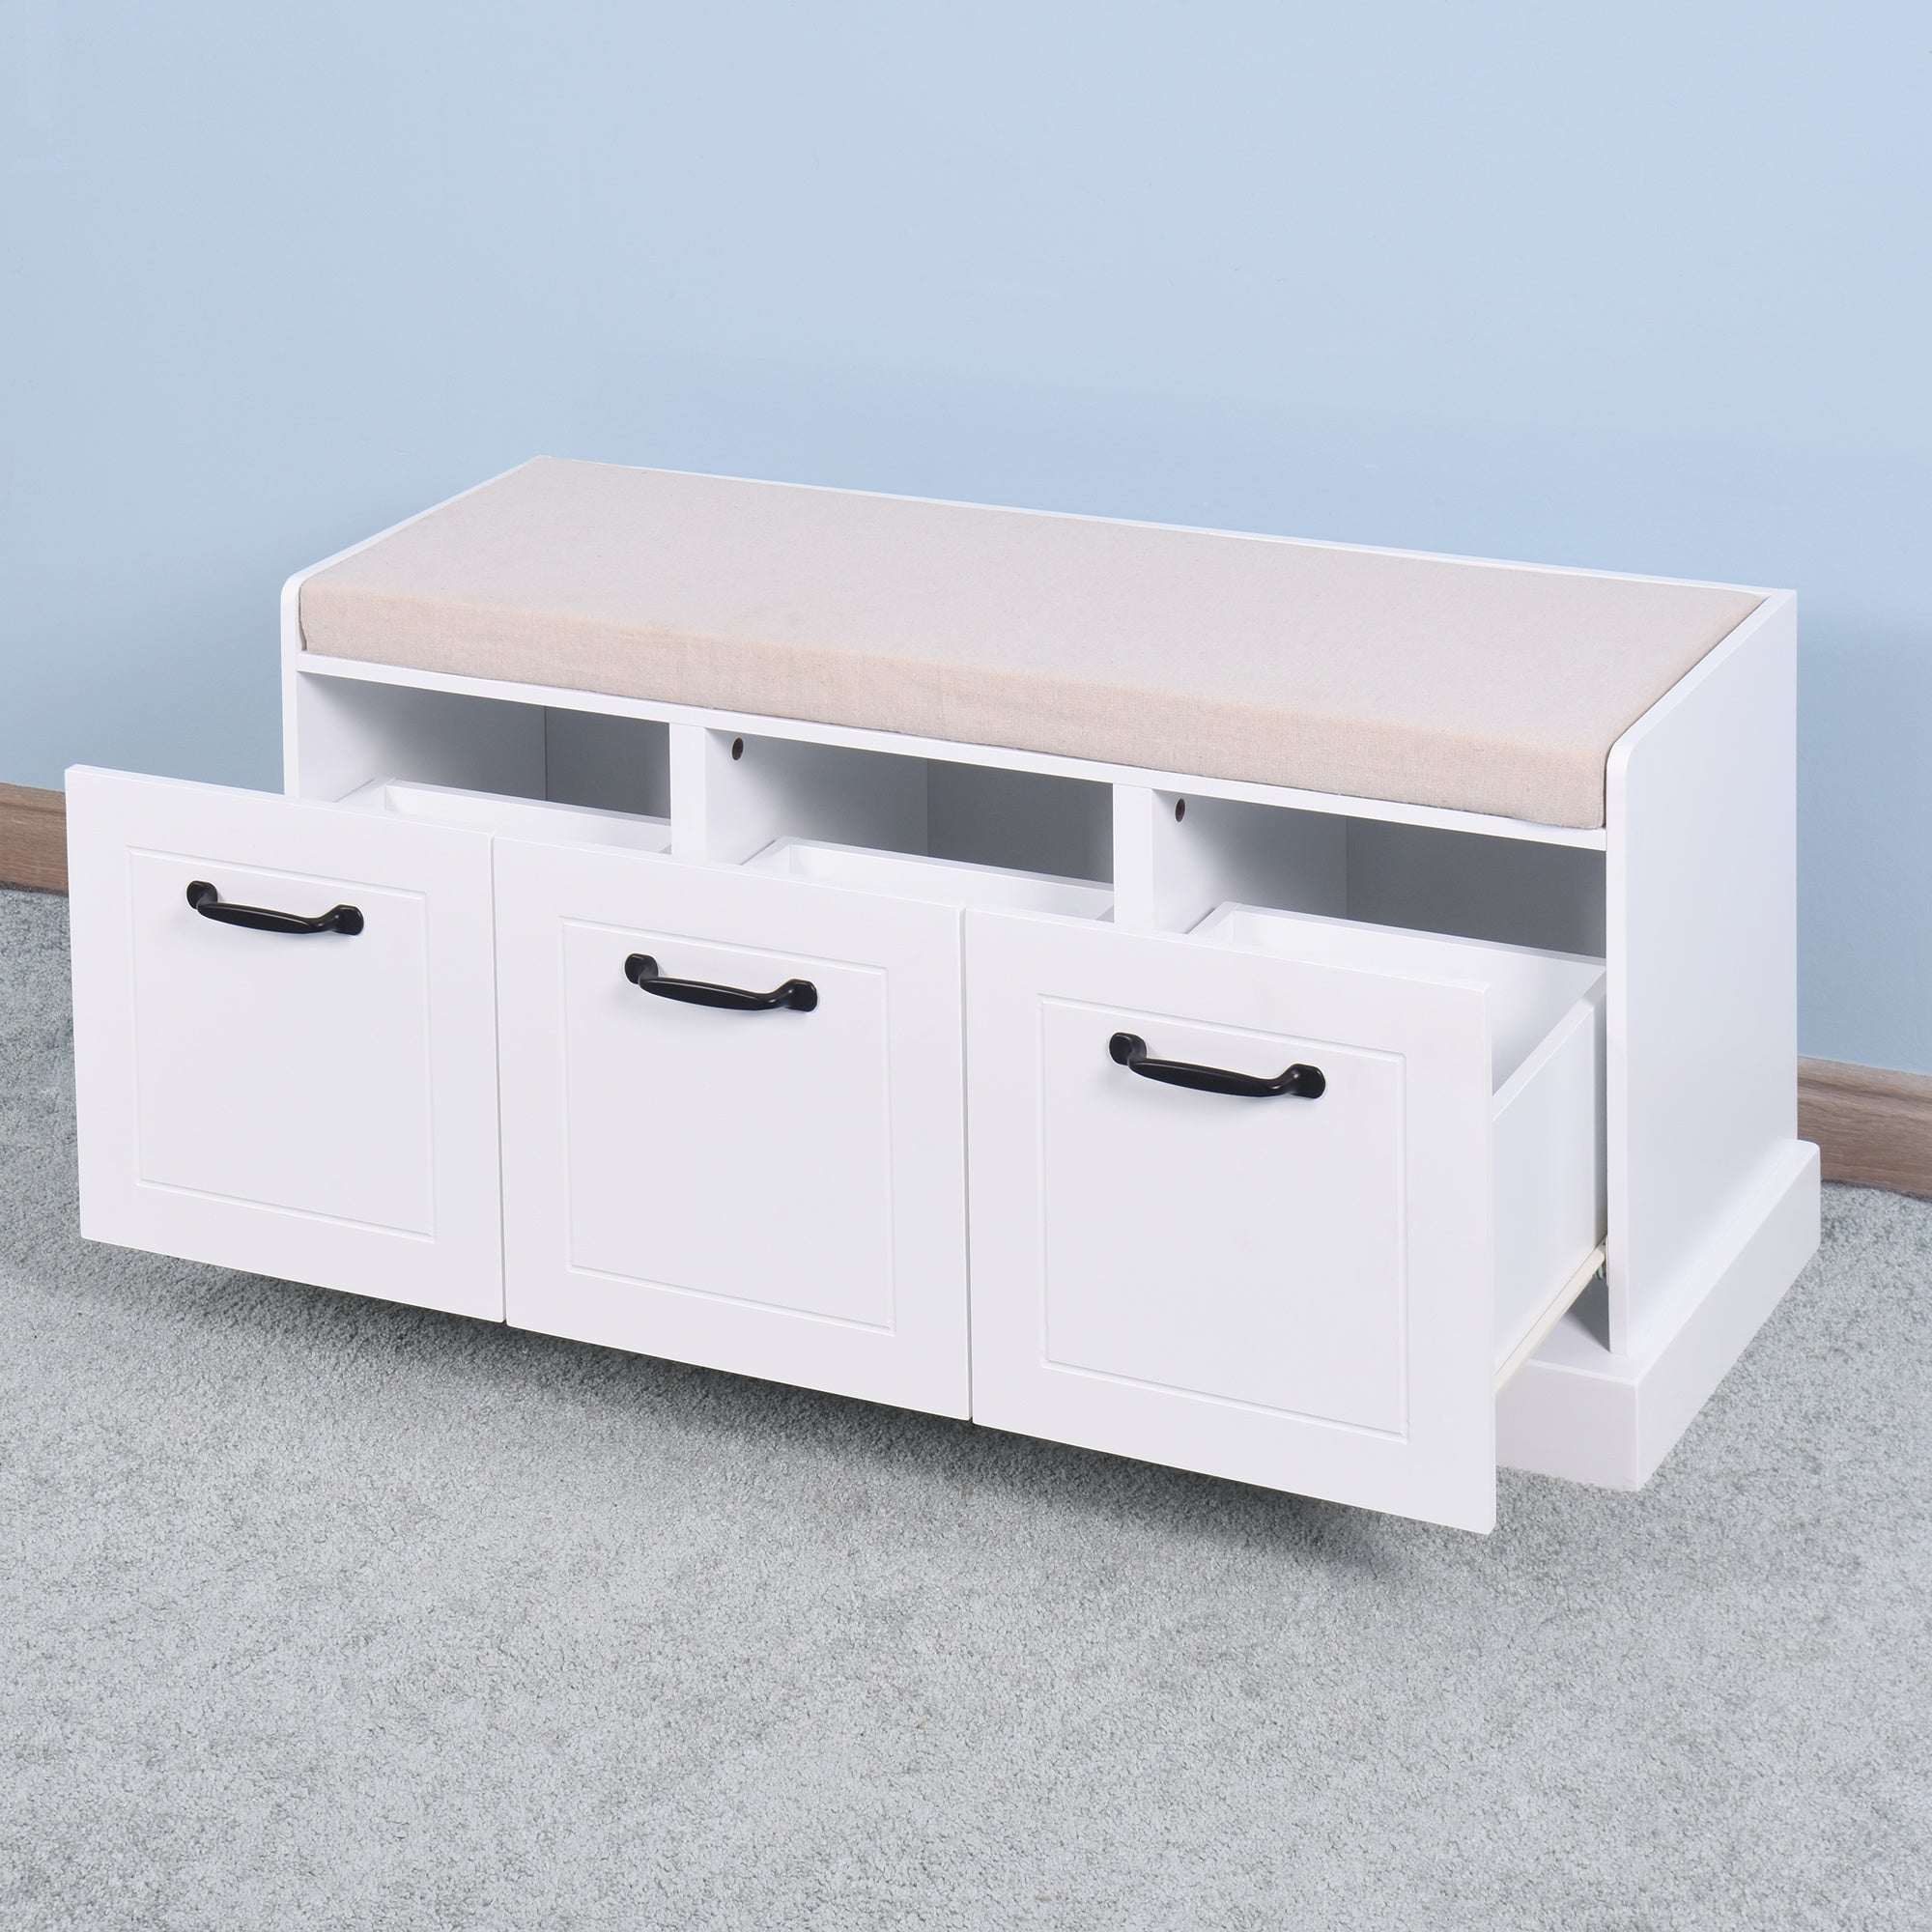 PK5- Wooden Entryway Shoe Cabinet Living Room Storage Bench with White Cushion